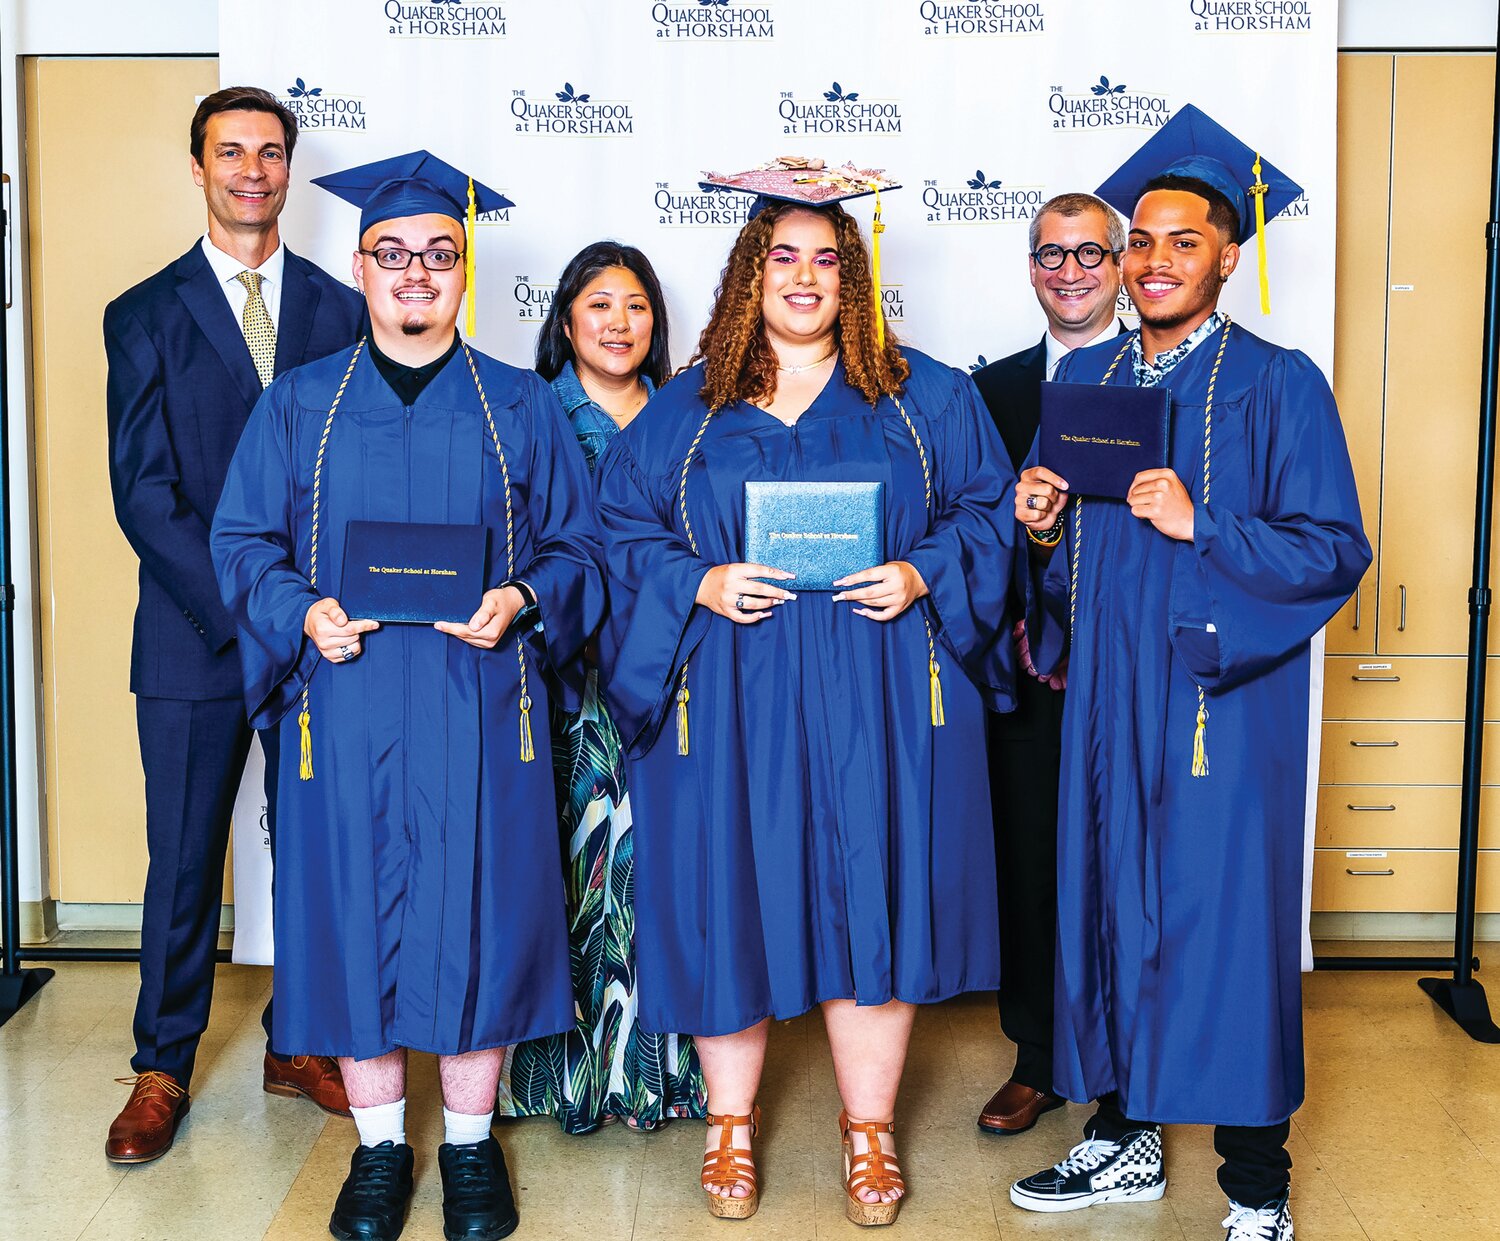 The Quakertown School at Horsham graduates  and staff, from left: back row,  Rich Marchini, Upper School director; Miyoung Glenn, assistant head for student affairs; Alex Brosowsky, head of school; front row, Howard Reichert, Brittany Gonzalez and Nyzier Brabham.